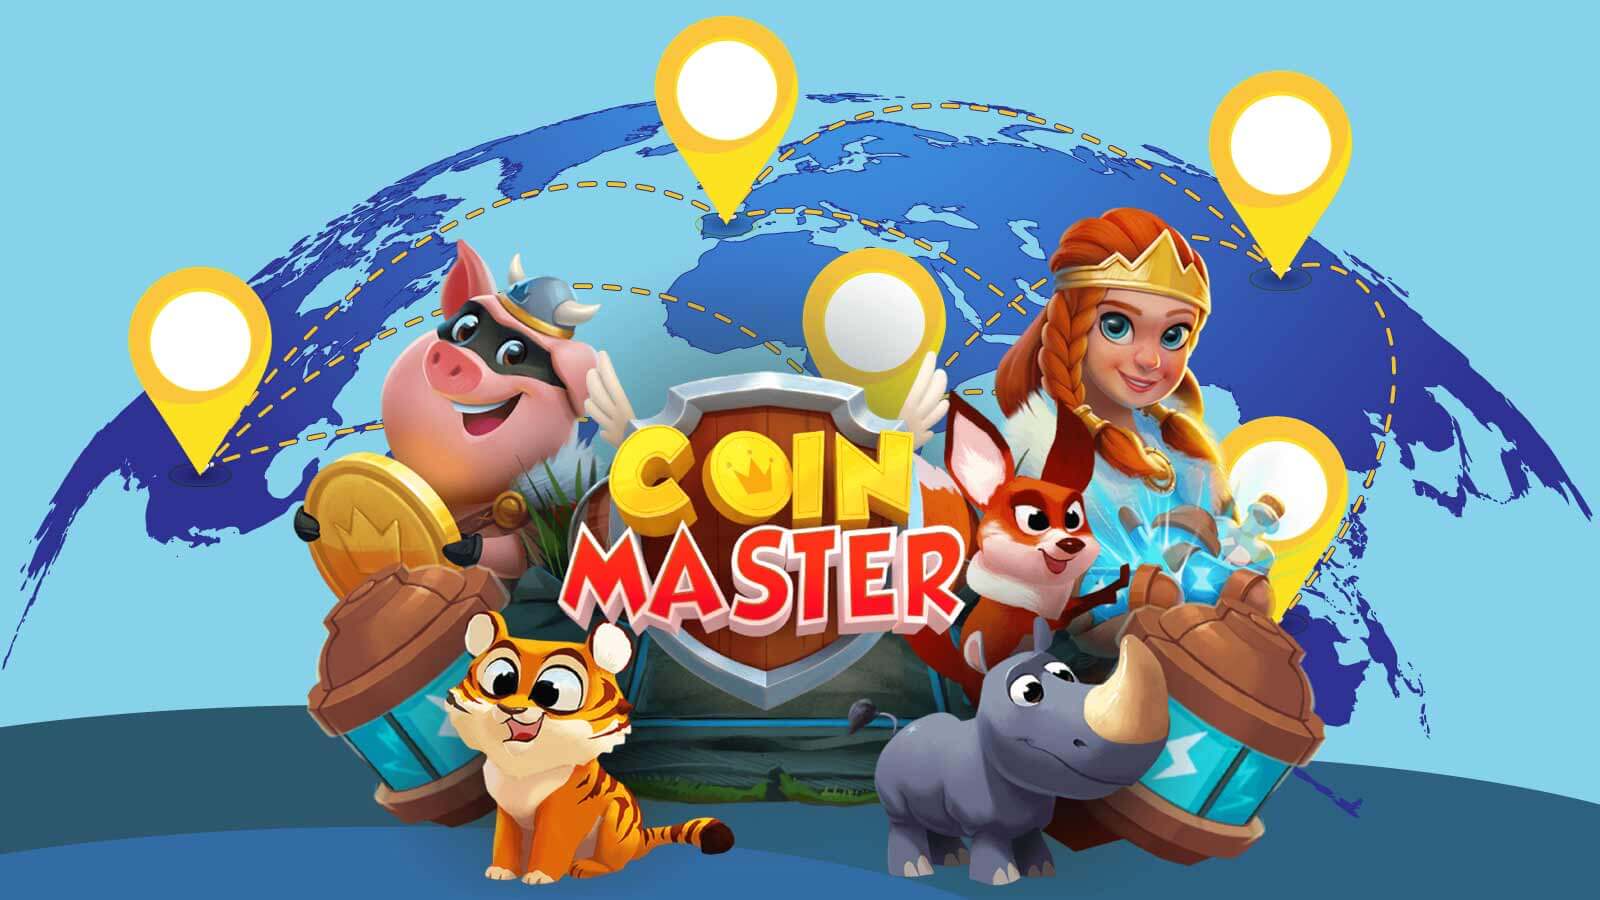 Coin Master hack – how to stay safe when spinning | Pocket Tactics